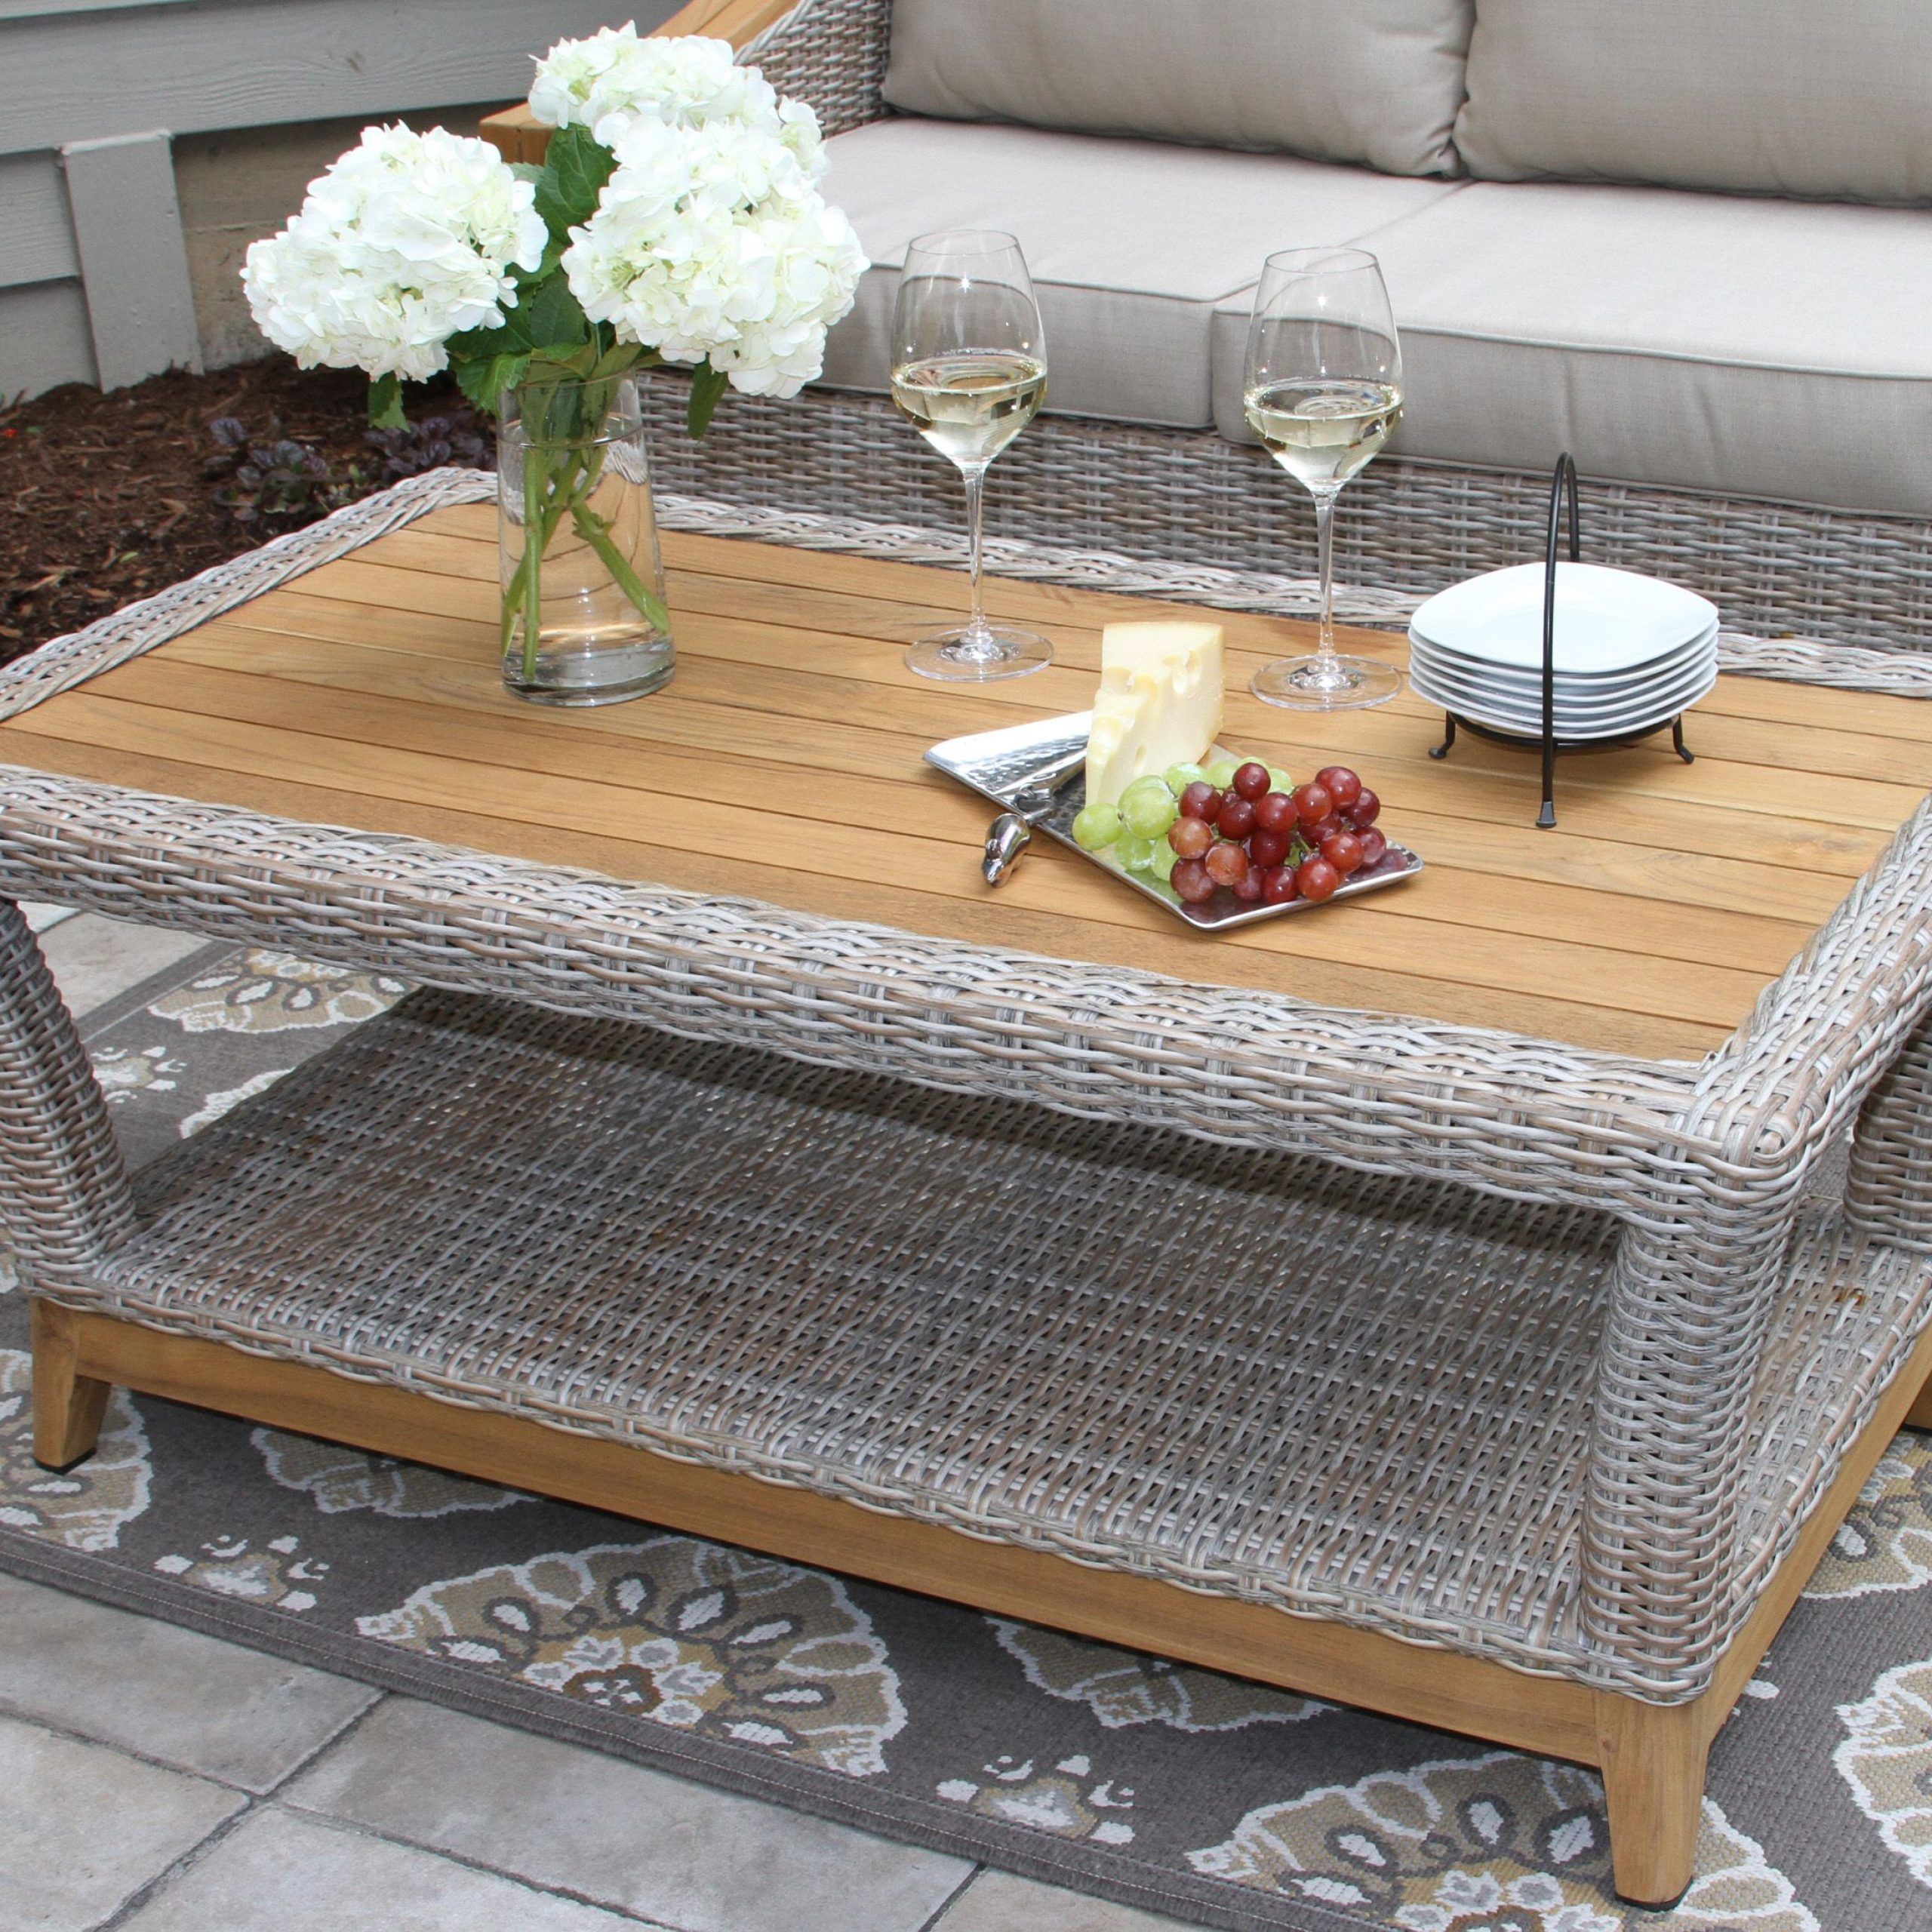 How To Decorate An Outdoor Coffee Table – Coffee Table Decor Throughout Modern Outdoor Patio Coffee Tables (View 9 of 20)